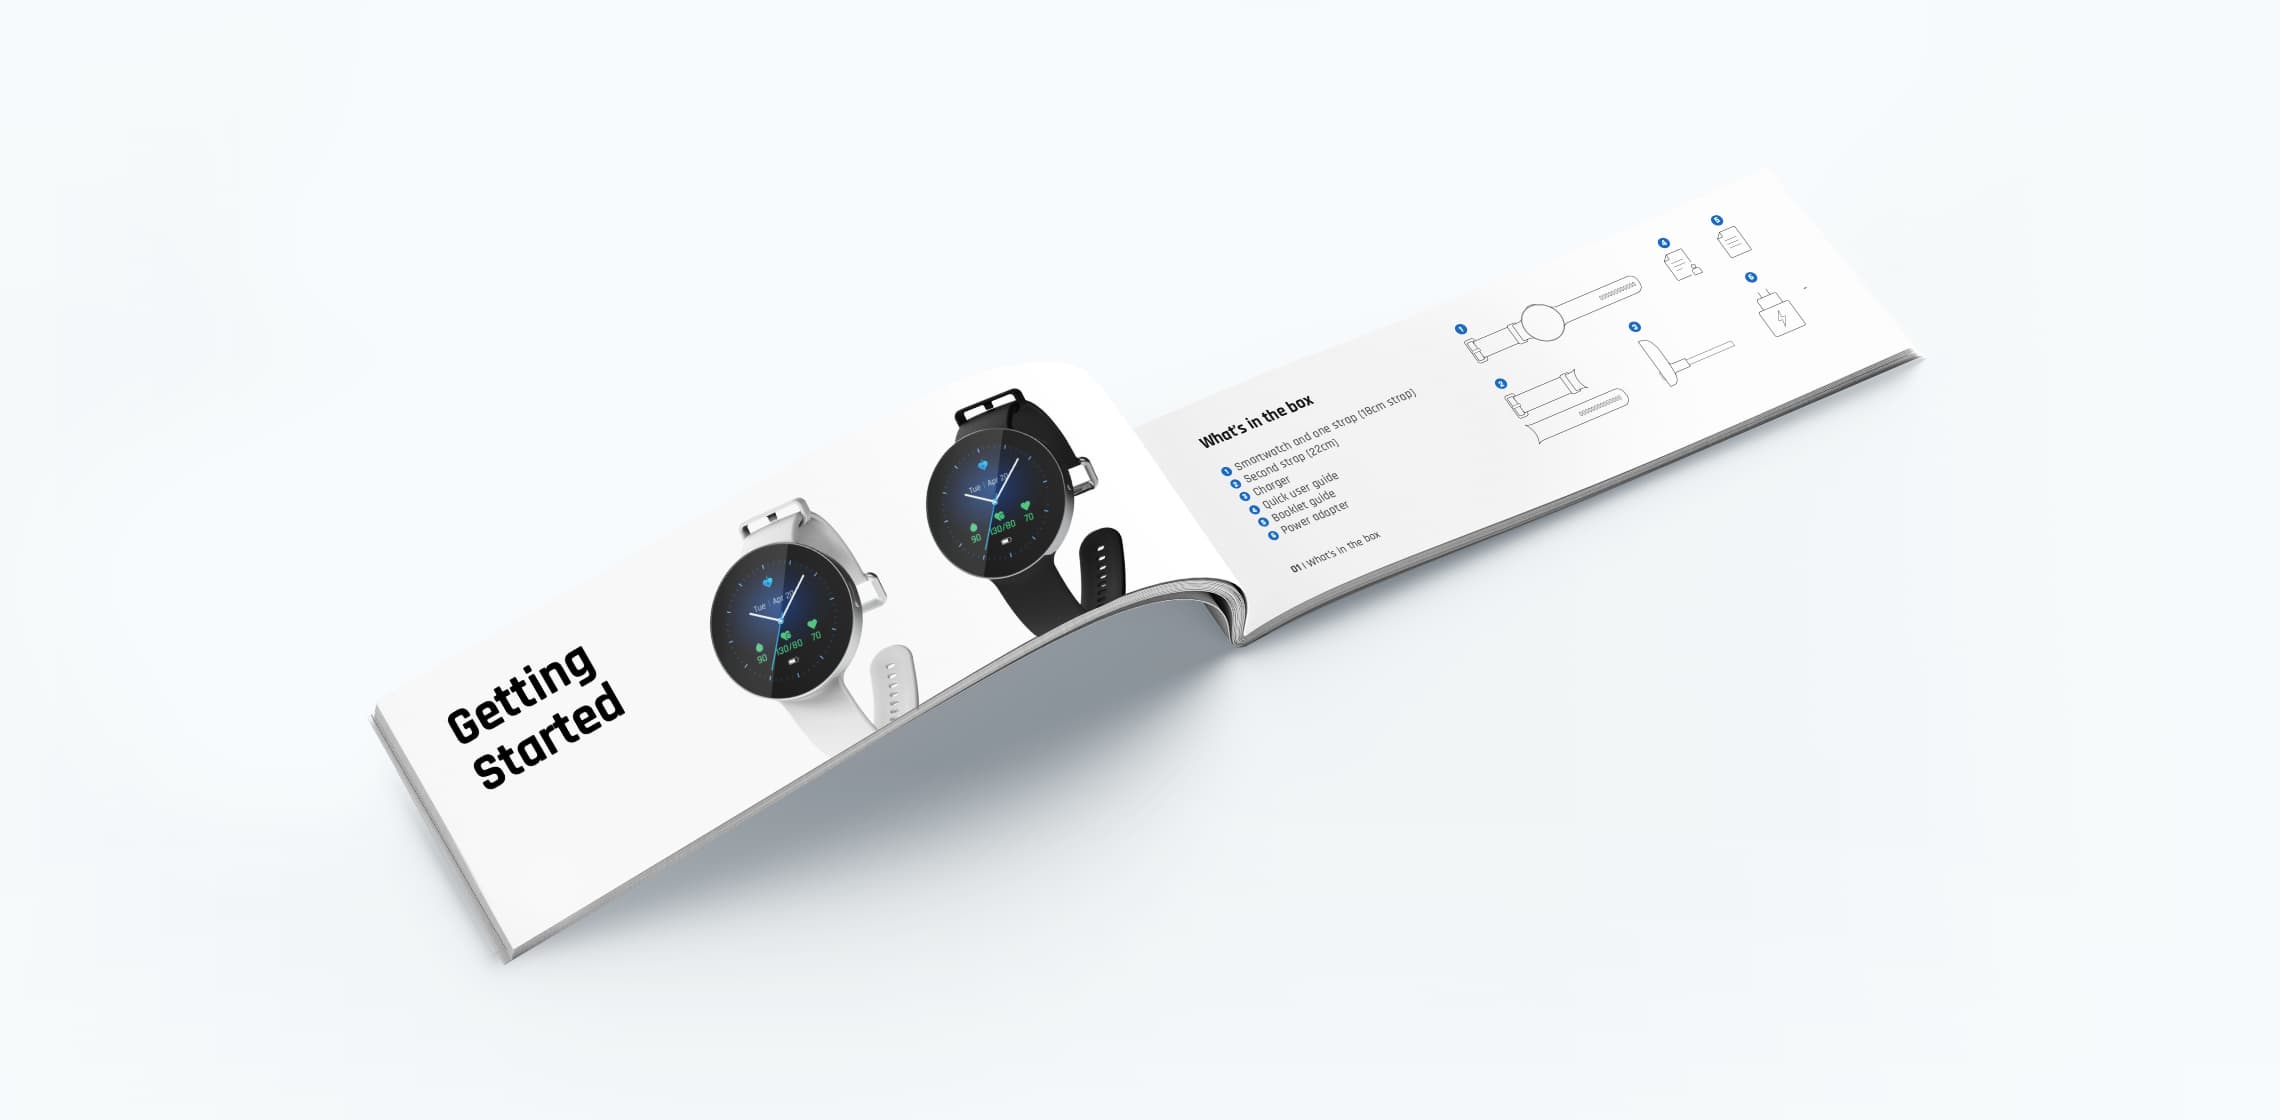 The user manual we designed for the smartwatch